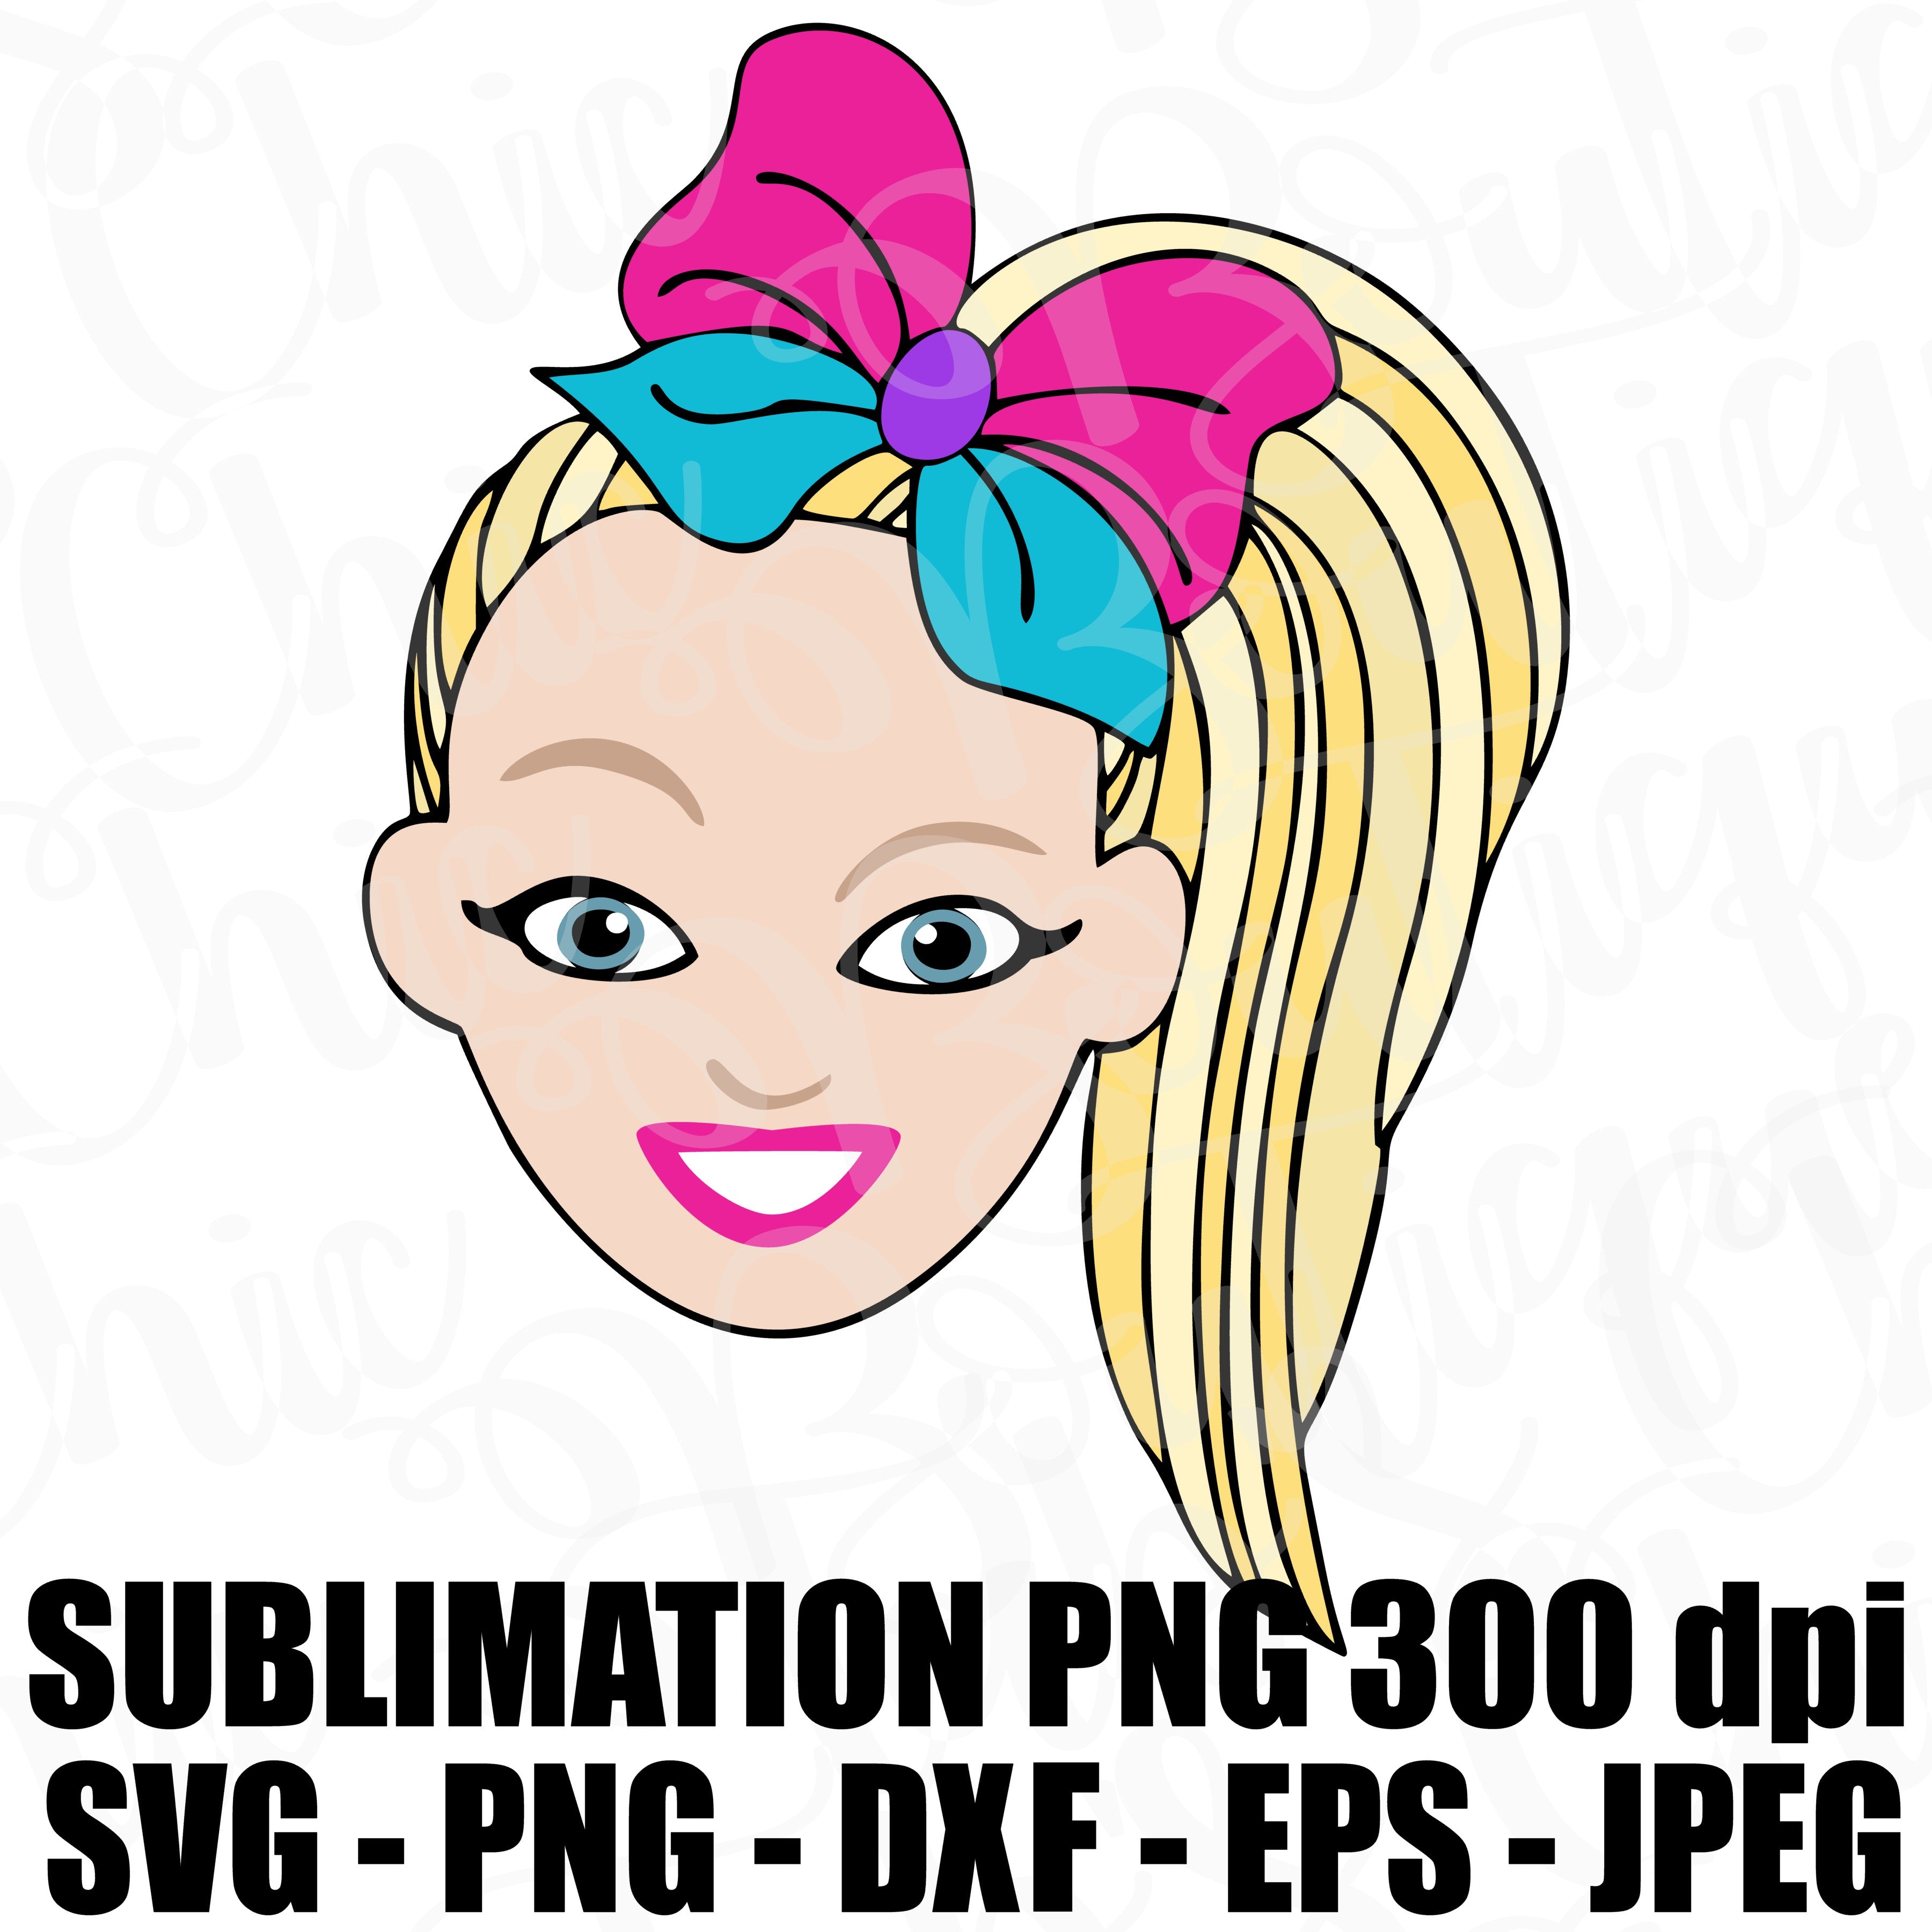 jojo siwa face svg jpeg high def 300 dpi png eps dxf topper sublimatio tab s chic boutique jojo siwa face svg jpeg high def 300 dpi png eps dxf topper sublimation iron on design layerable